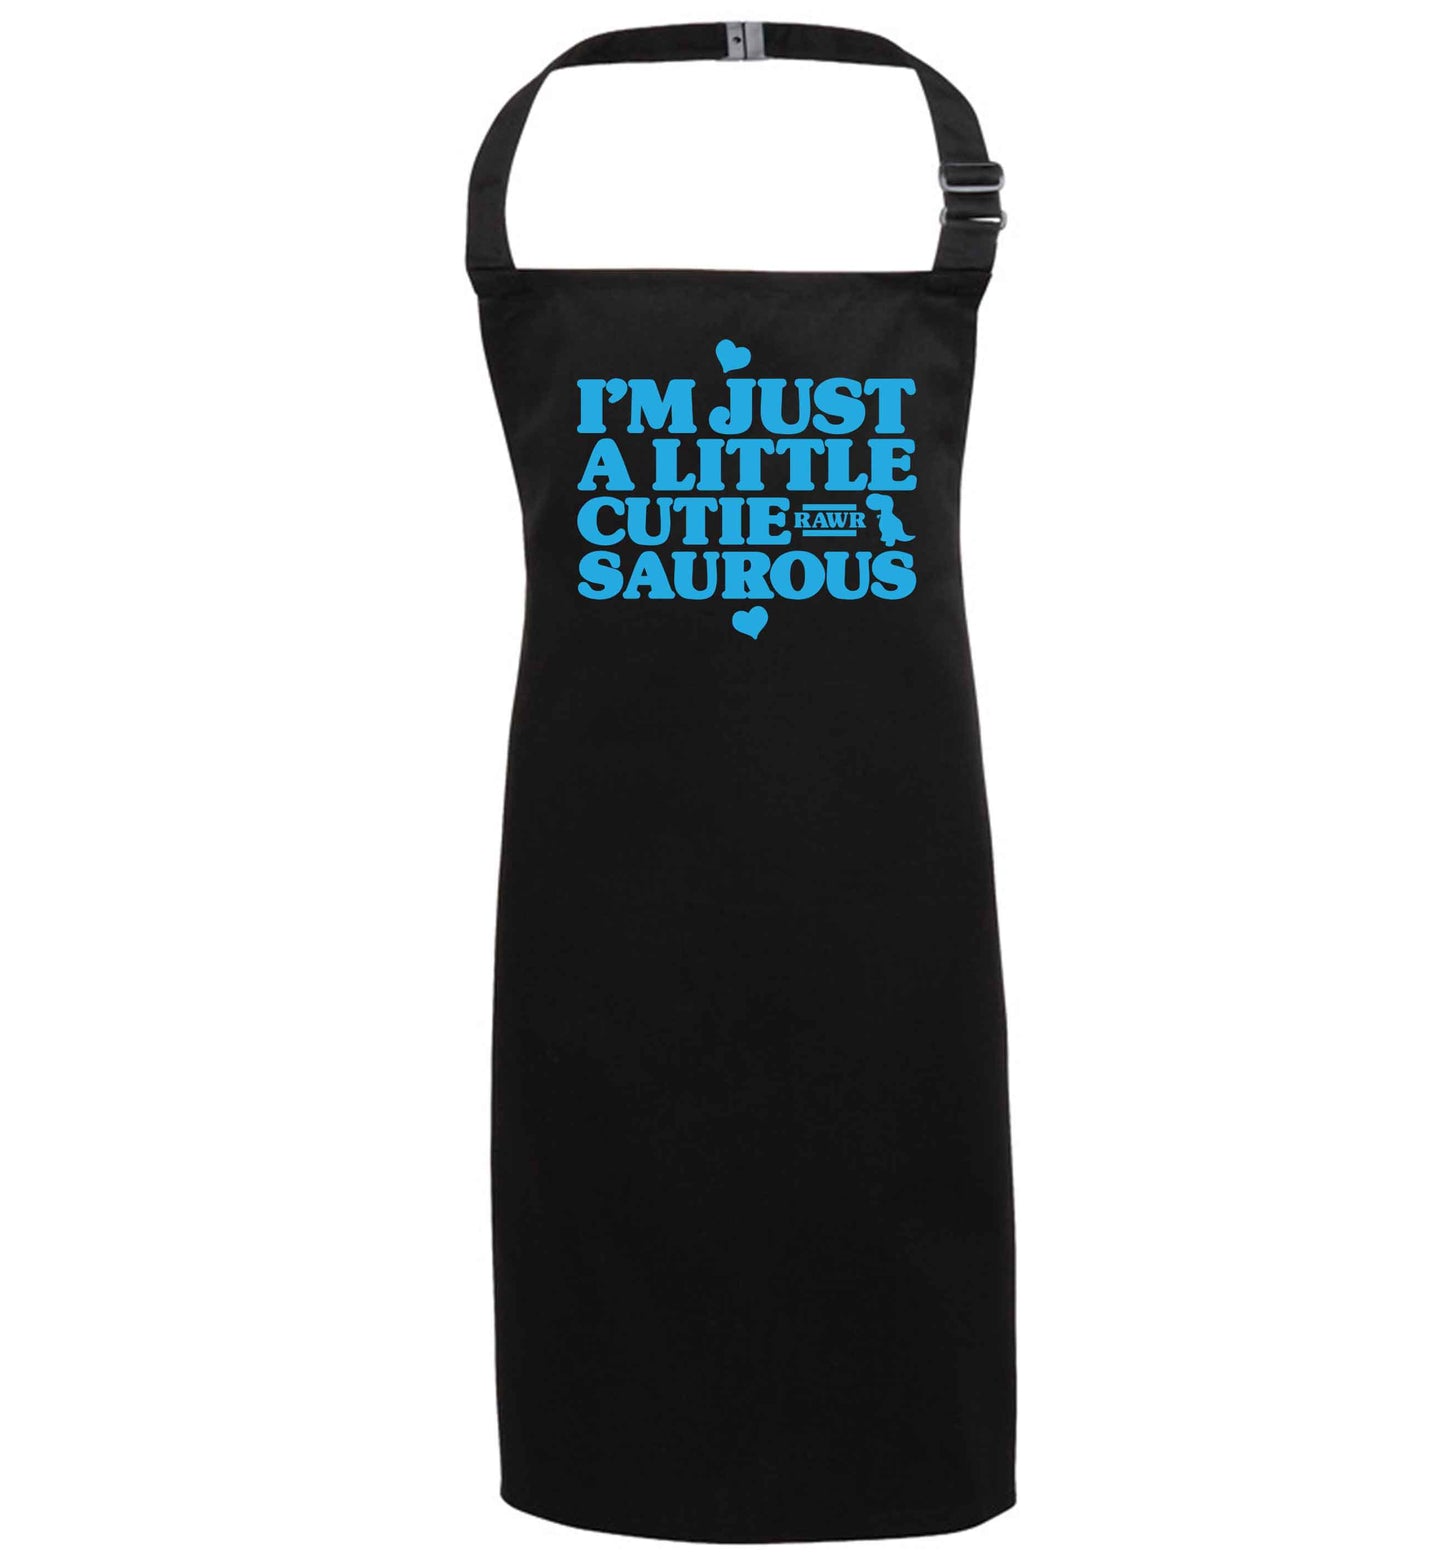 I'm just a little cutiesaurous black apron 7-10 years